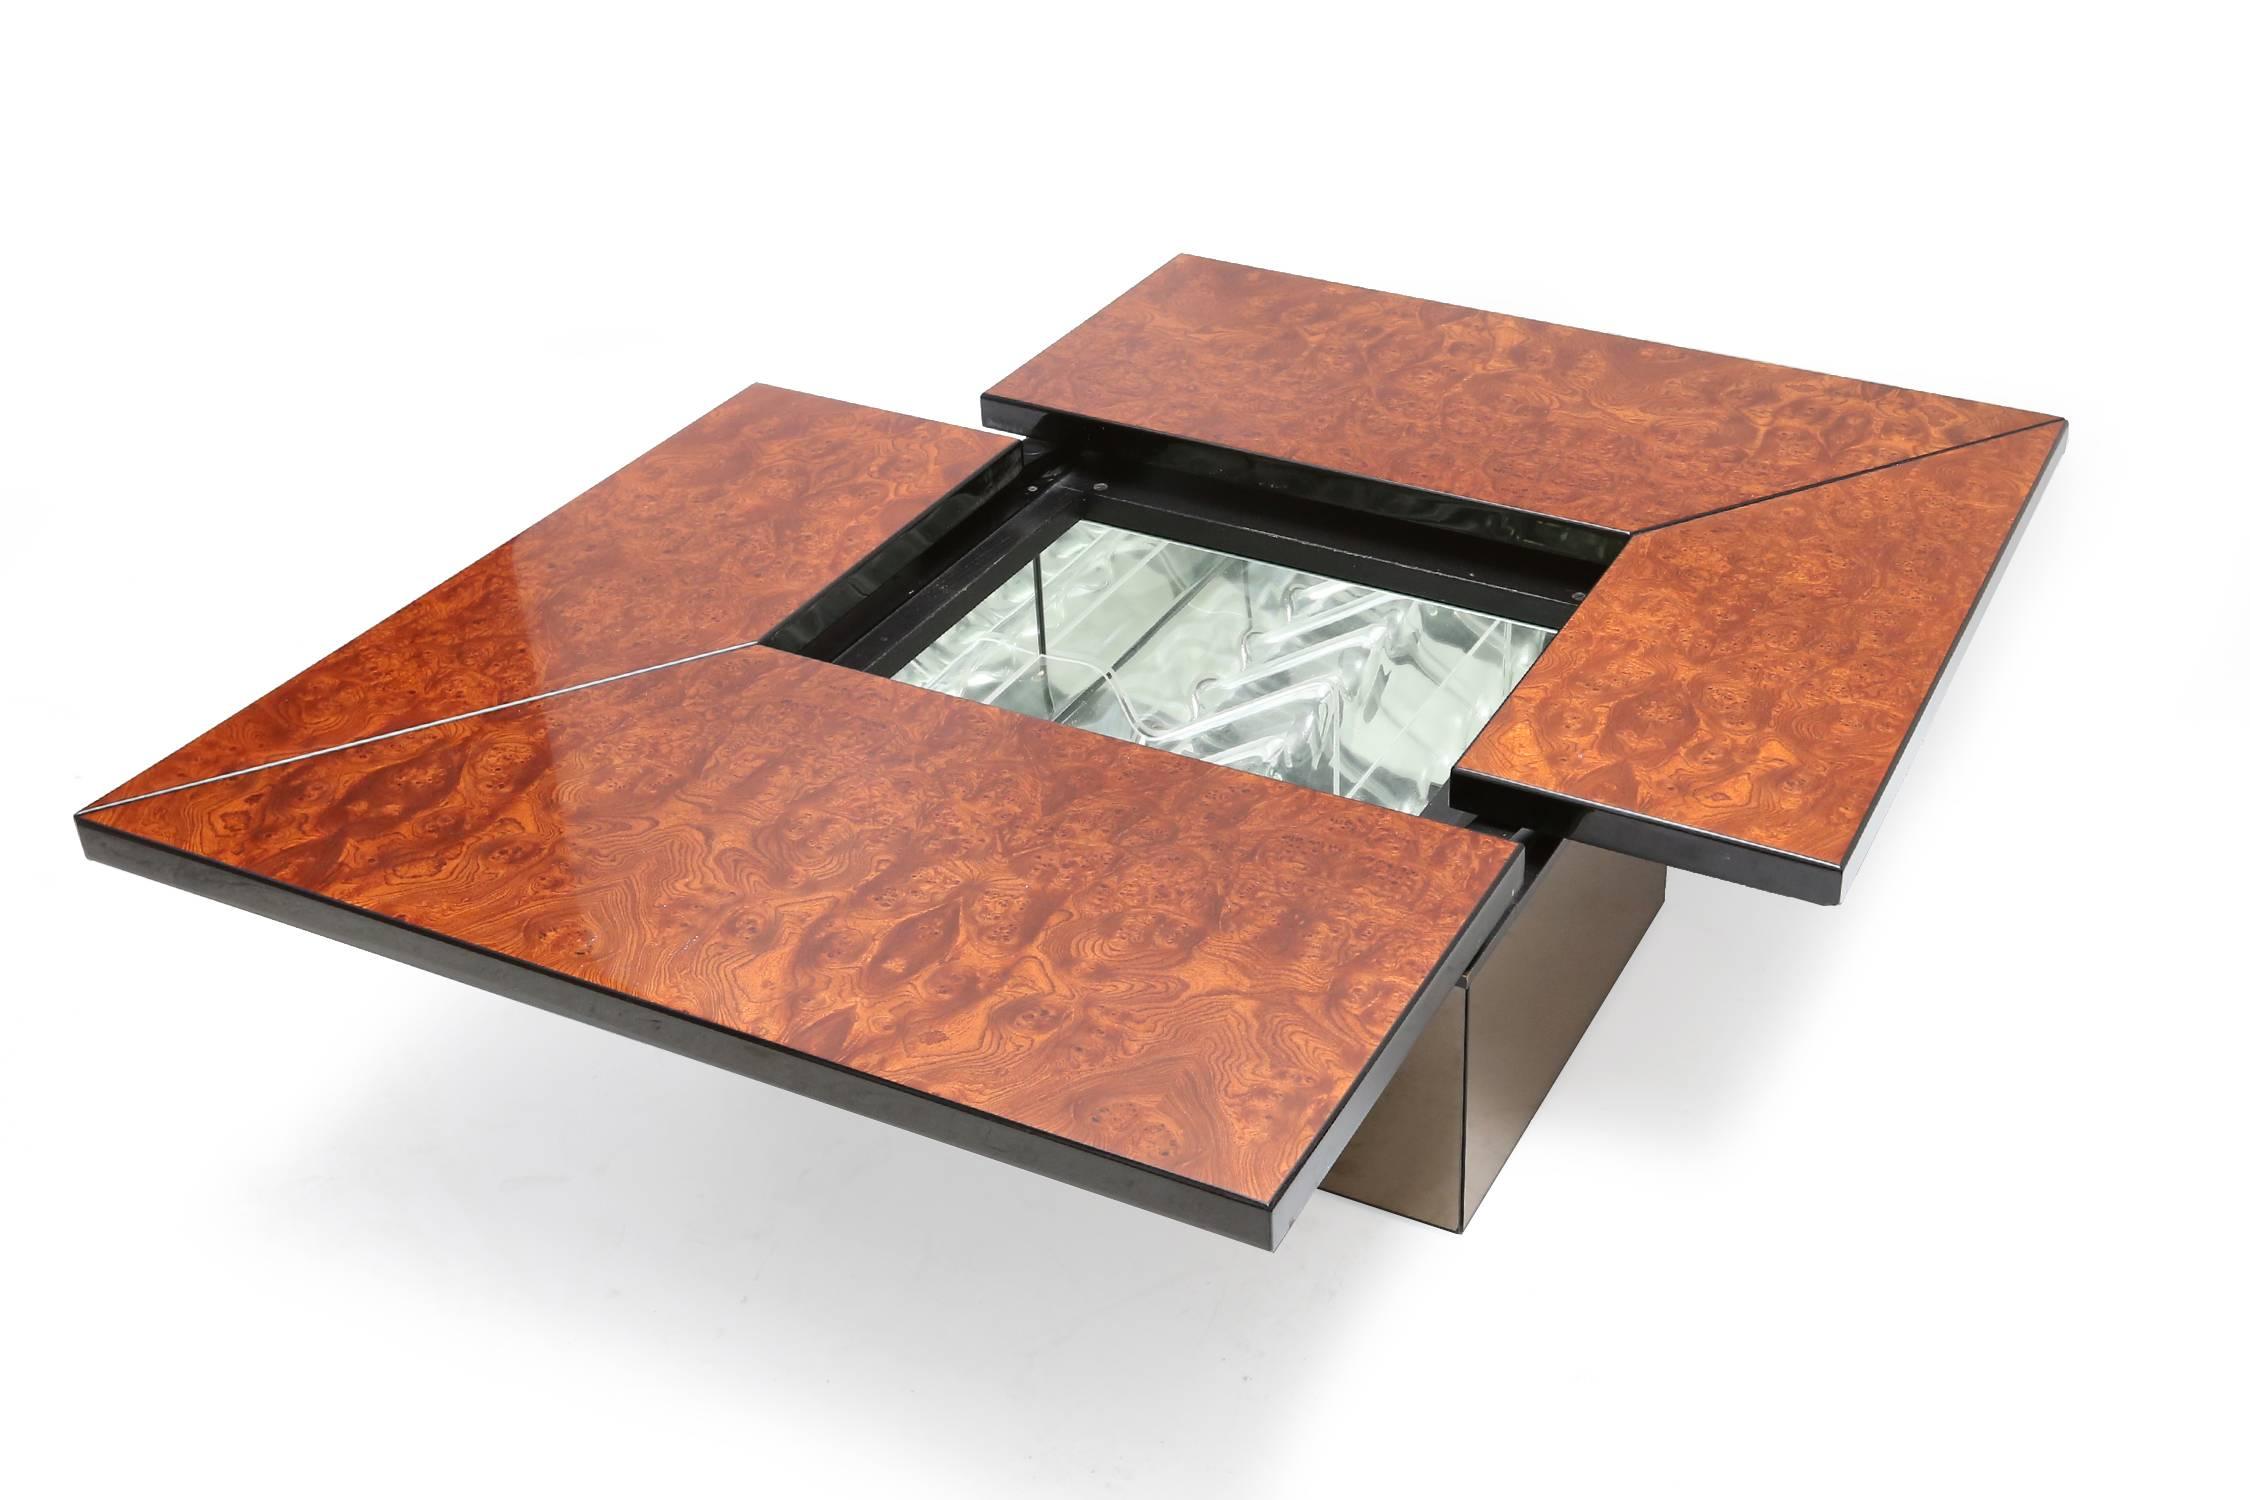 Mid-Century Modern Lacquered Burl Veneer Sliding Coffee Table with Hidden Dry Bar by Paul Frank